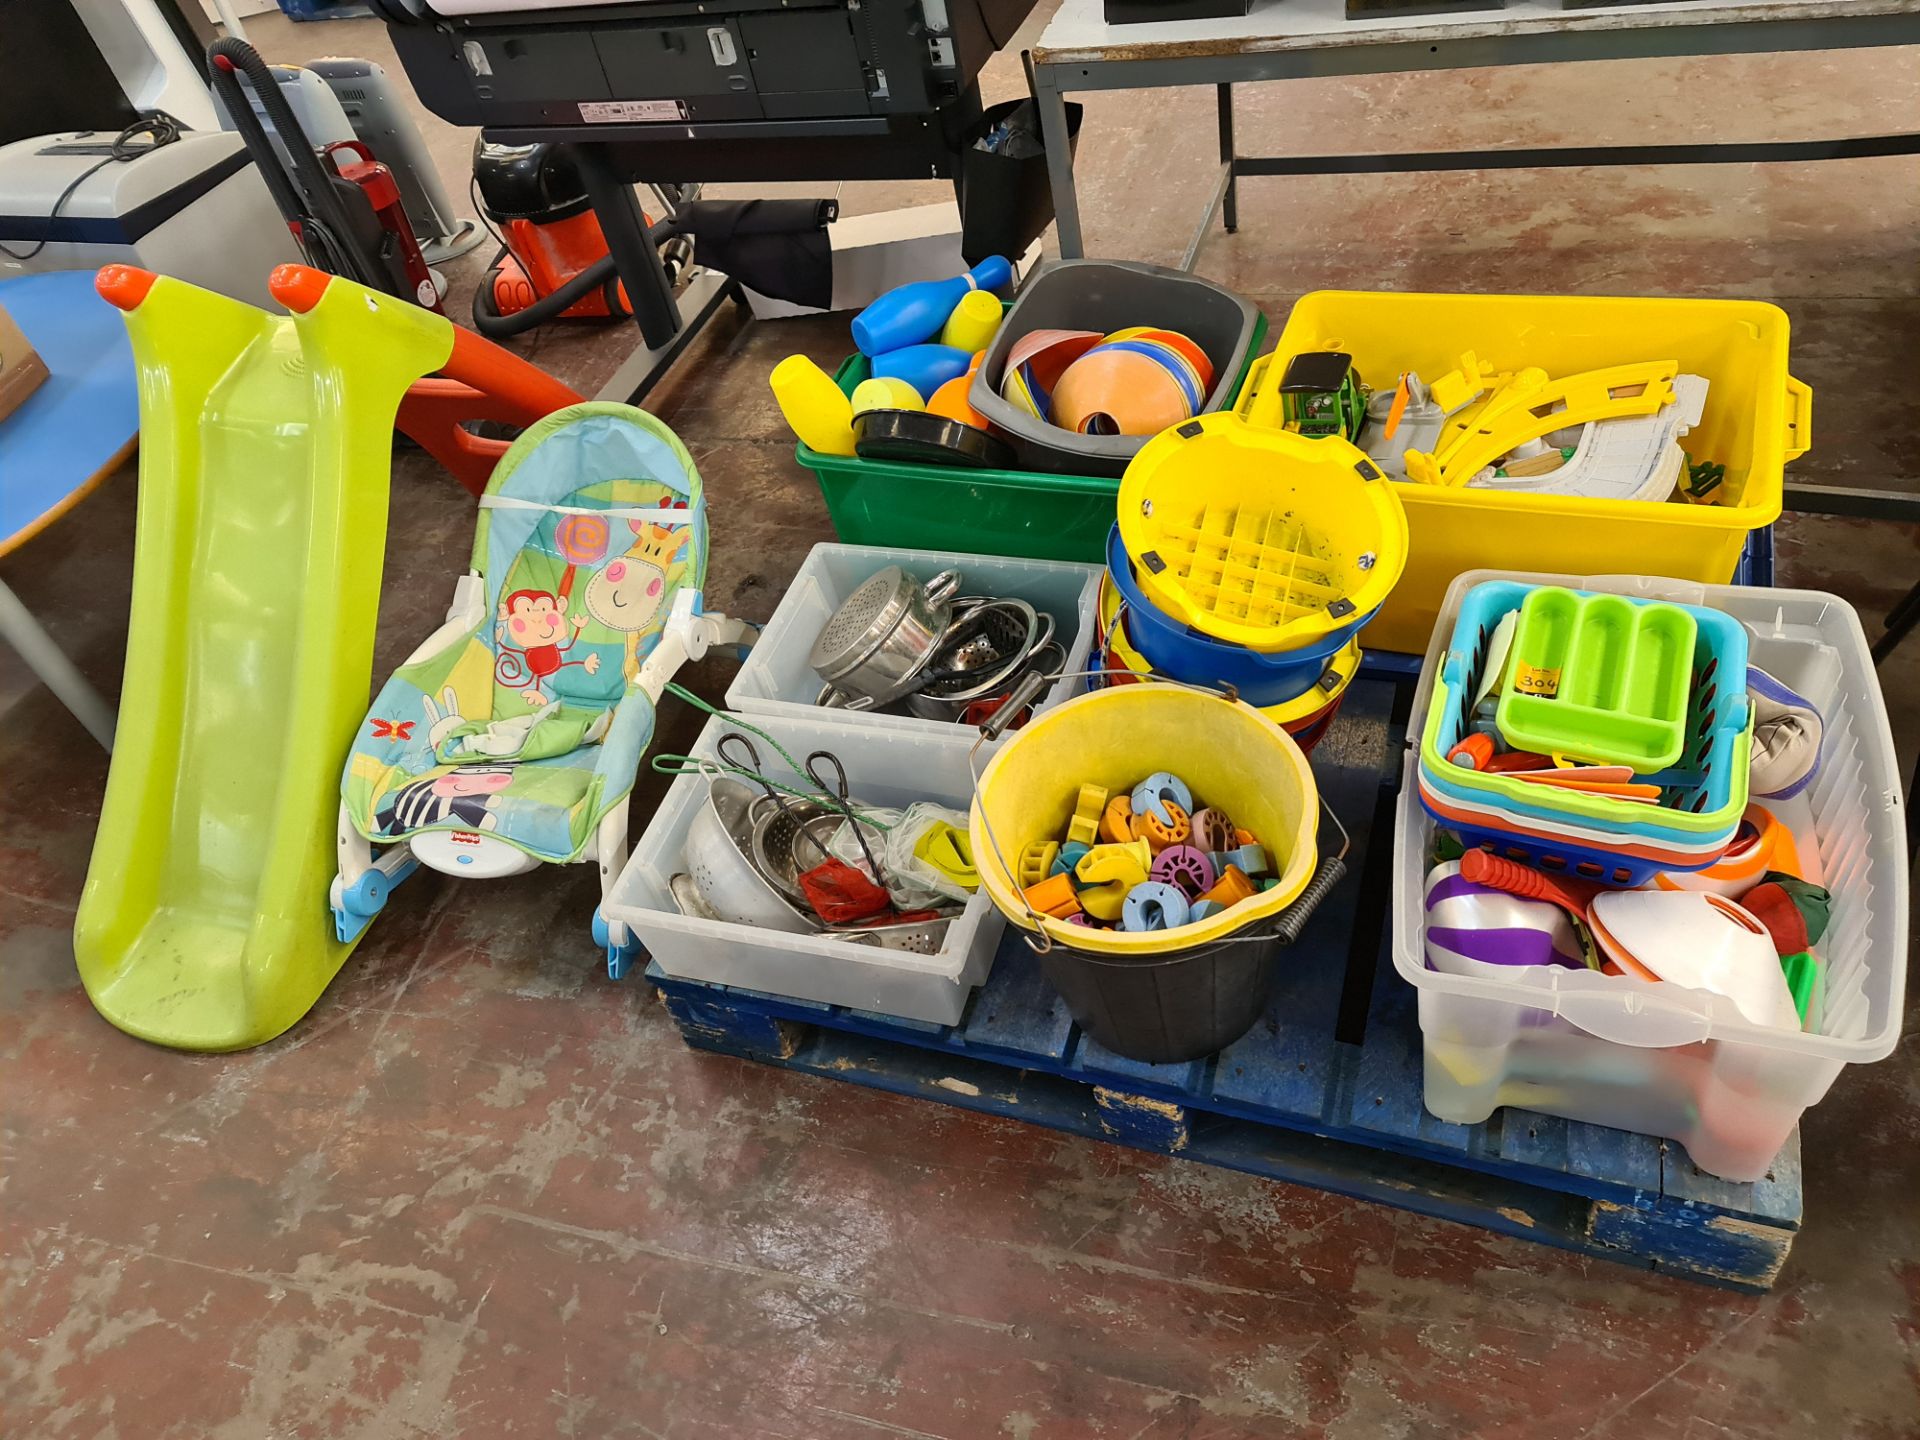 Contents of a pallet of children's toys & similar, plus slide & baby rocker located to the side as p